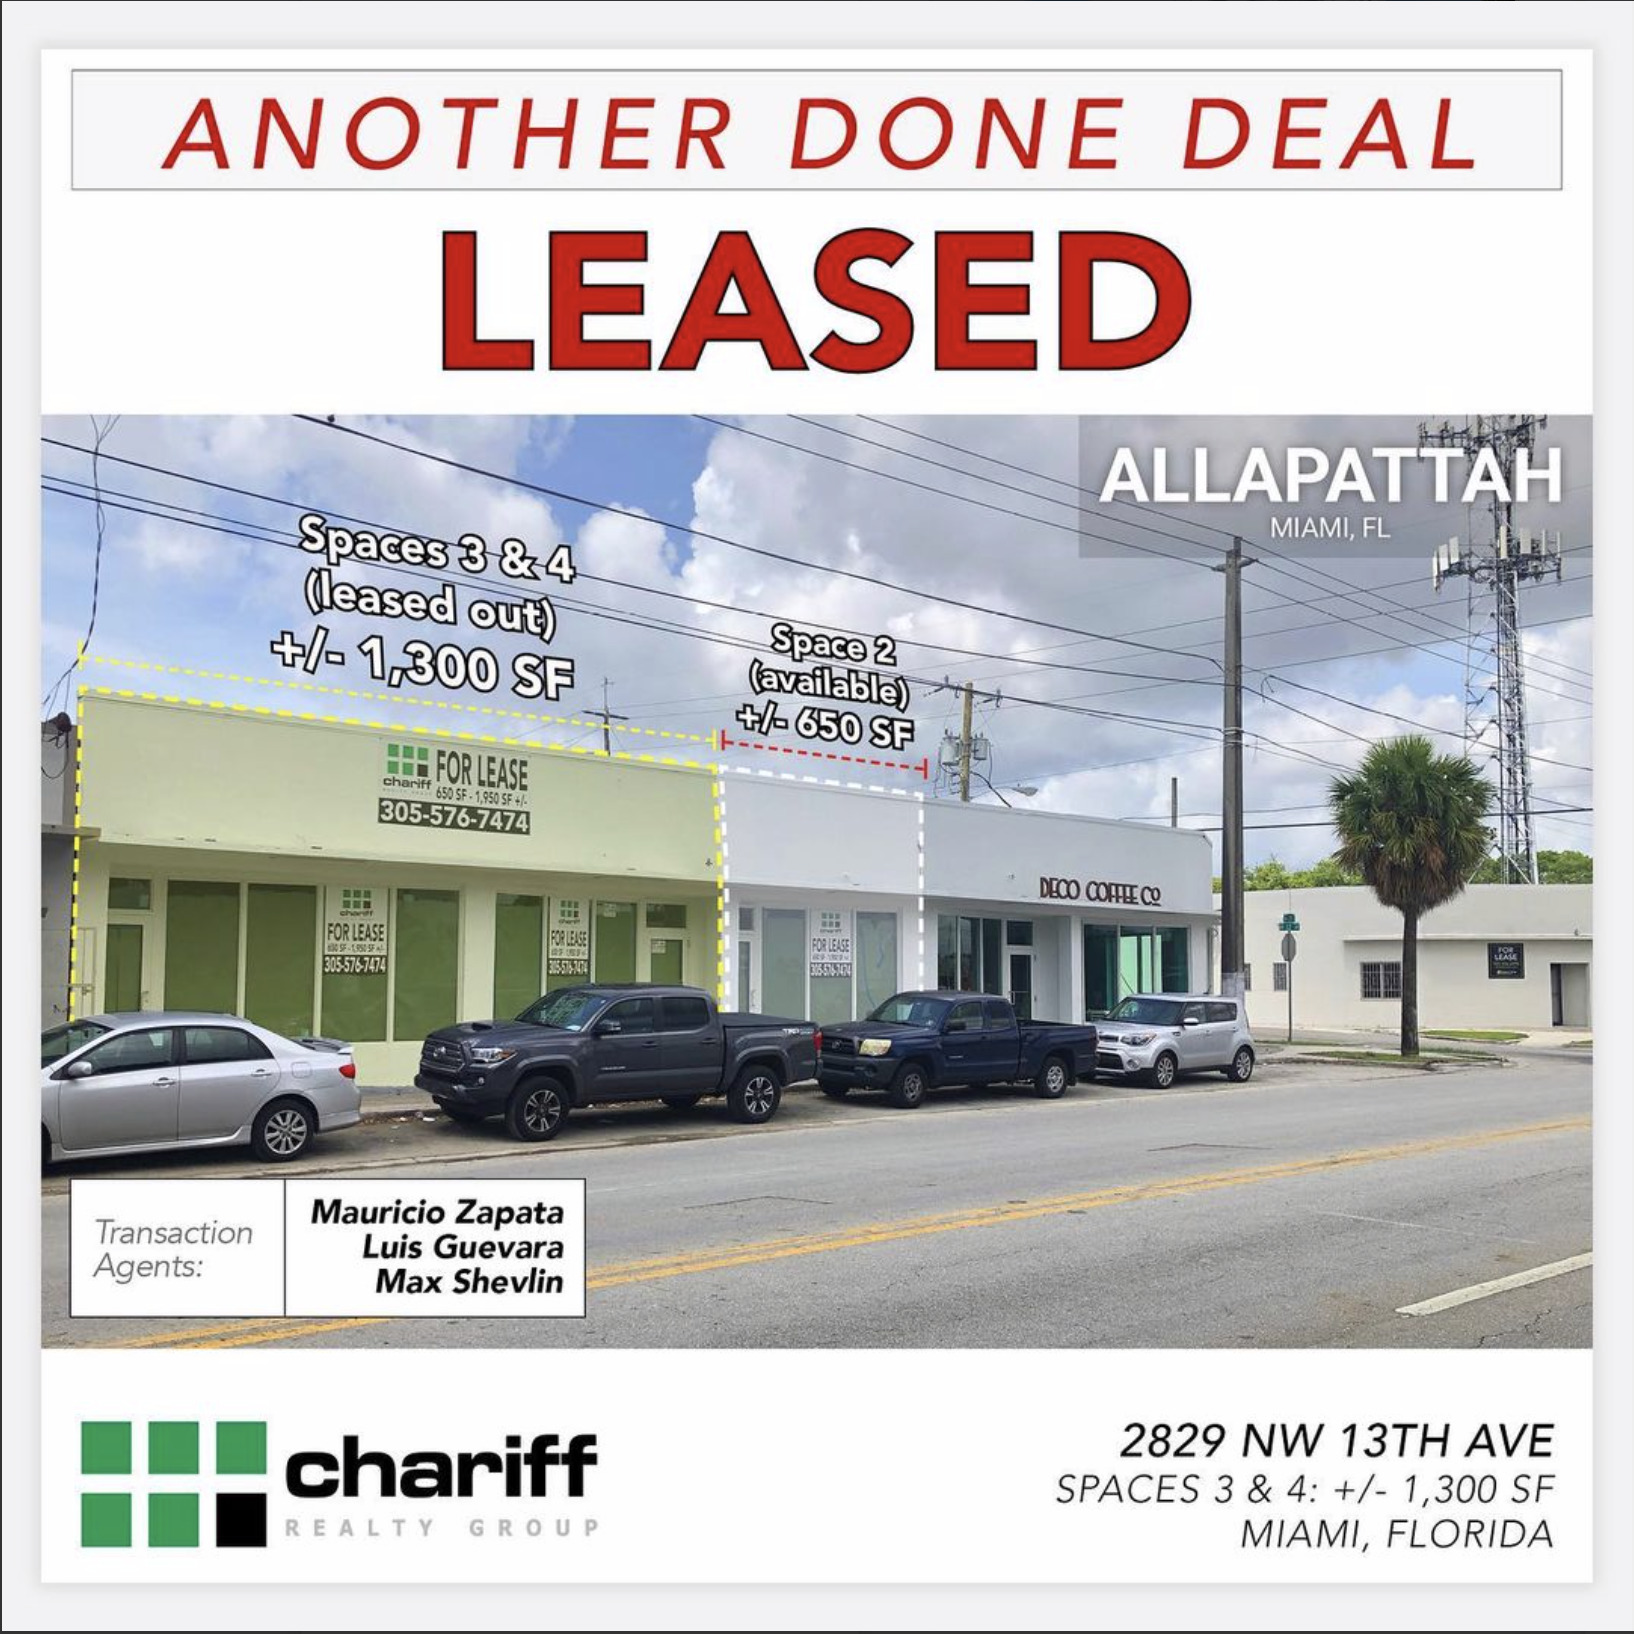 2829 NW 13th Ave - Another done deal: Leased - allapattah - miami - florida - 33142 chariff realty group